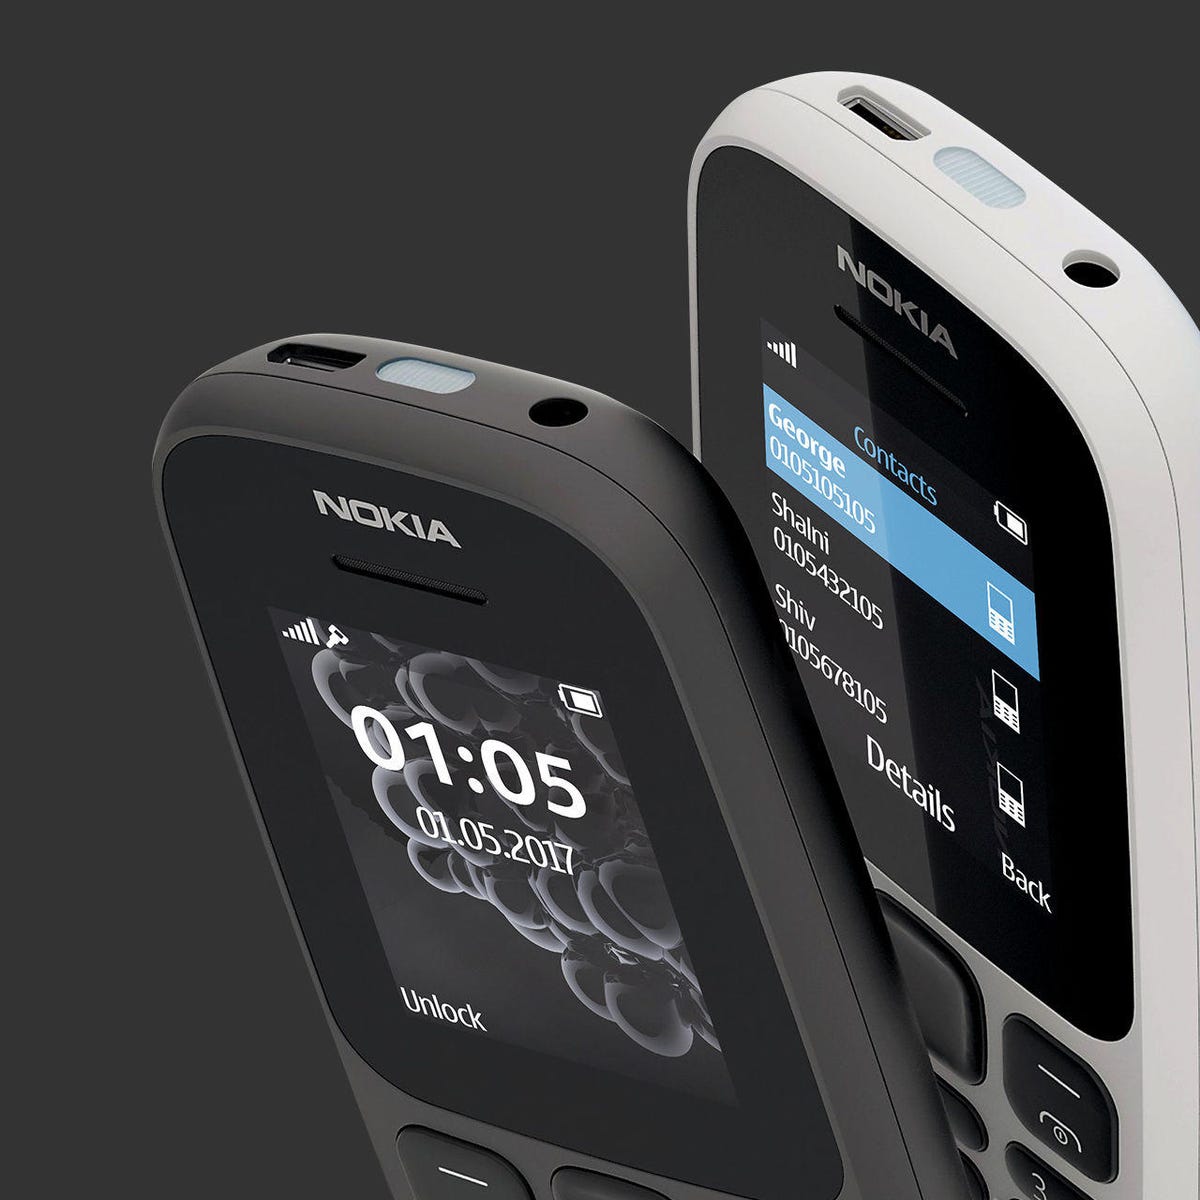 New Nokia 105 is a budget-friendly €13 feature phone